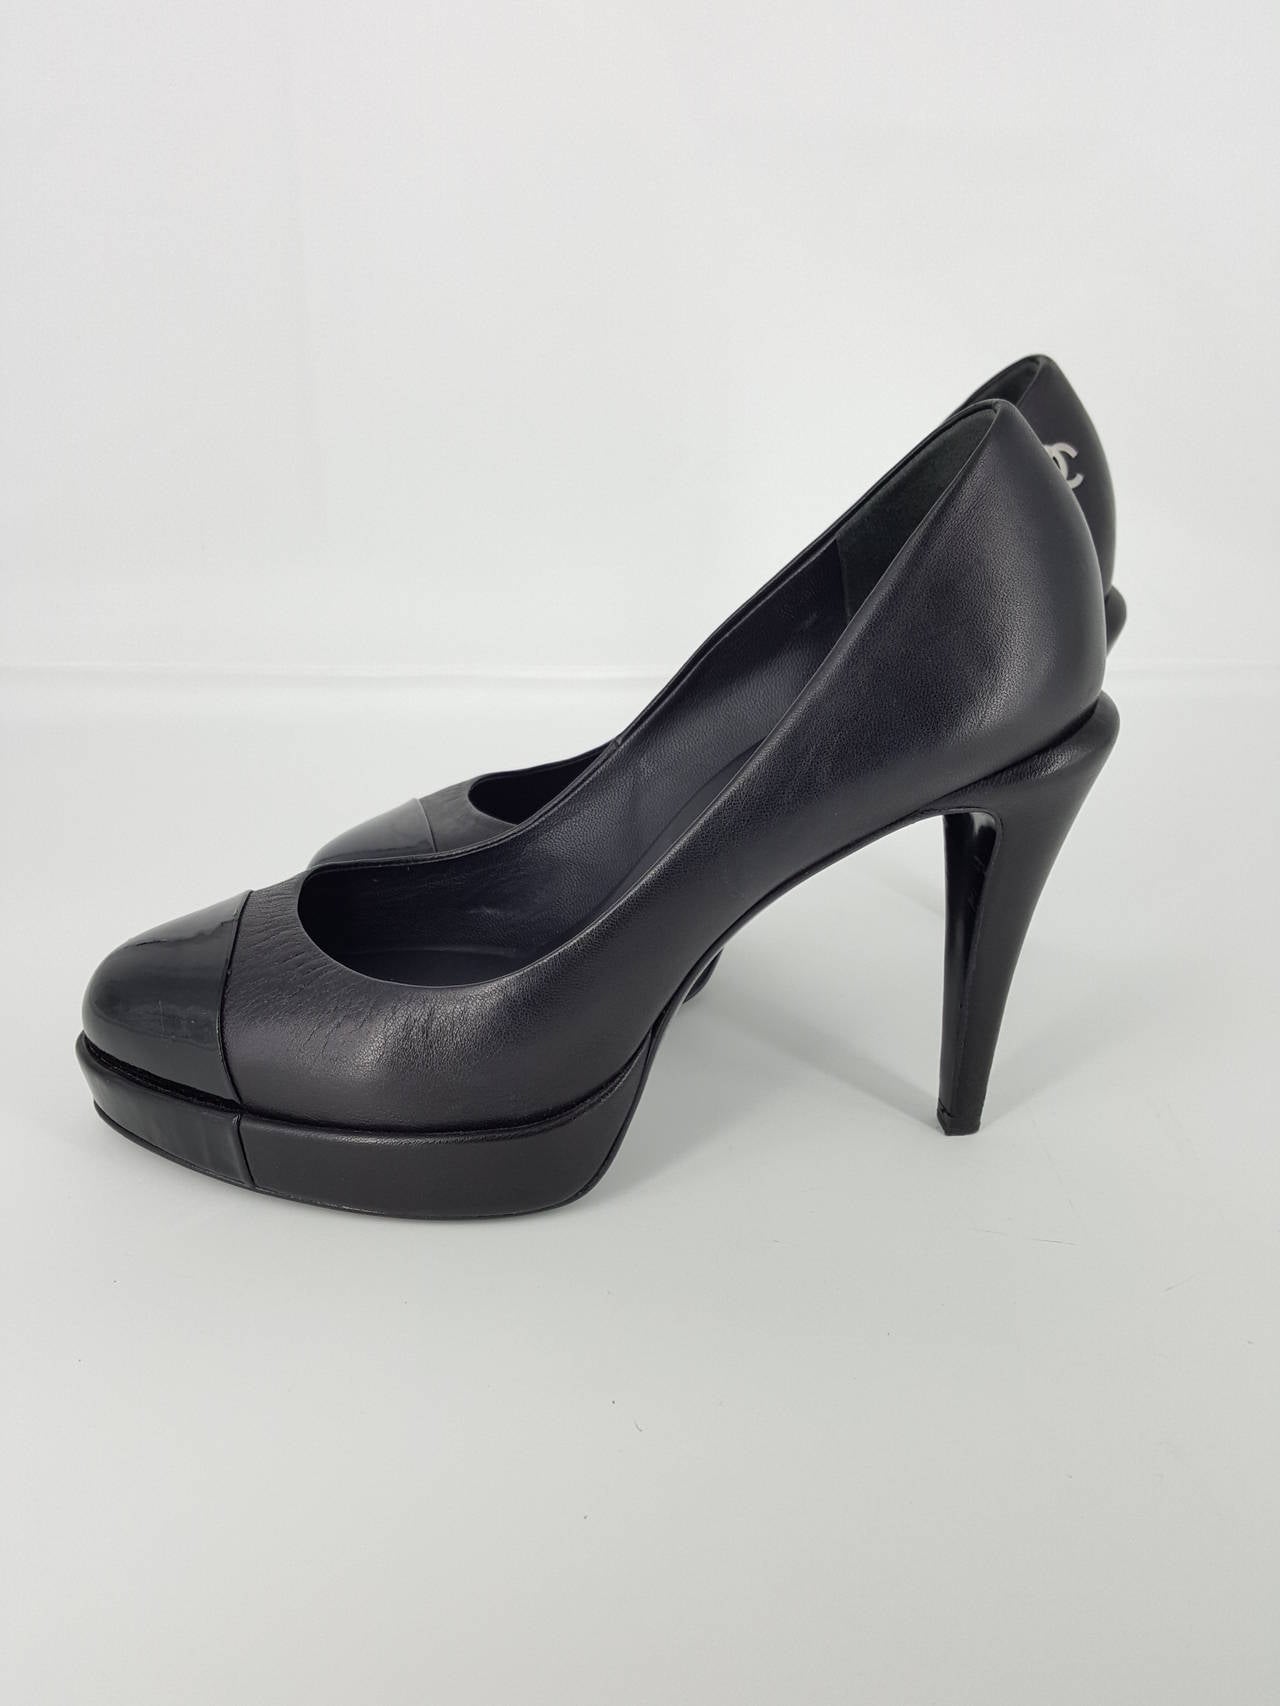 Offered for sale is a beautiful pair of Chanel platform high heels.  These are Black calf skin leather with a patent leather toe cap.  There is a silver 